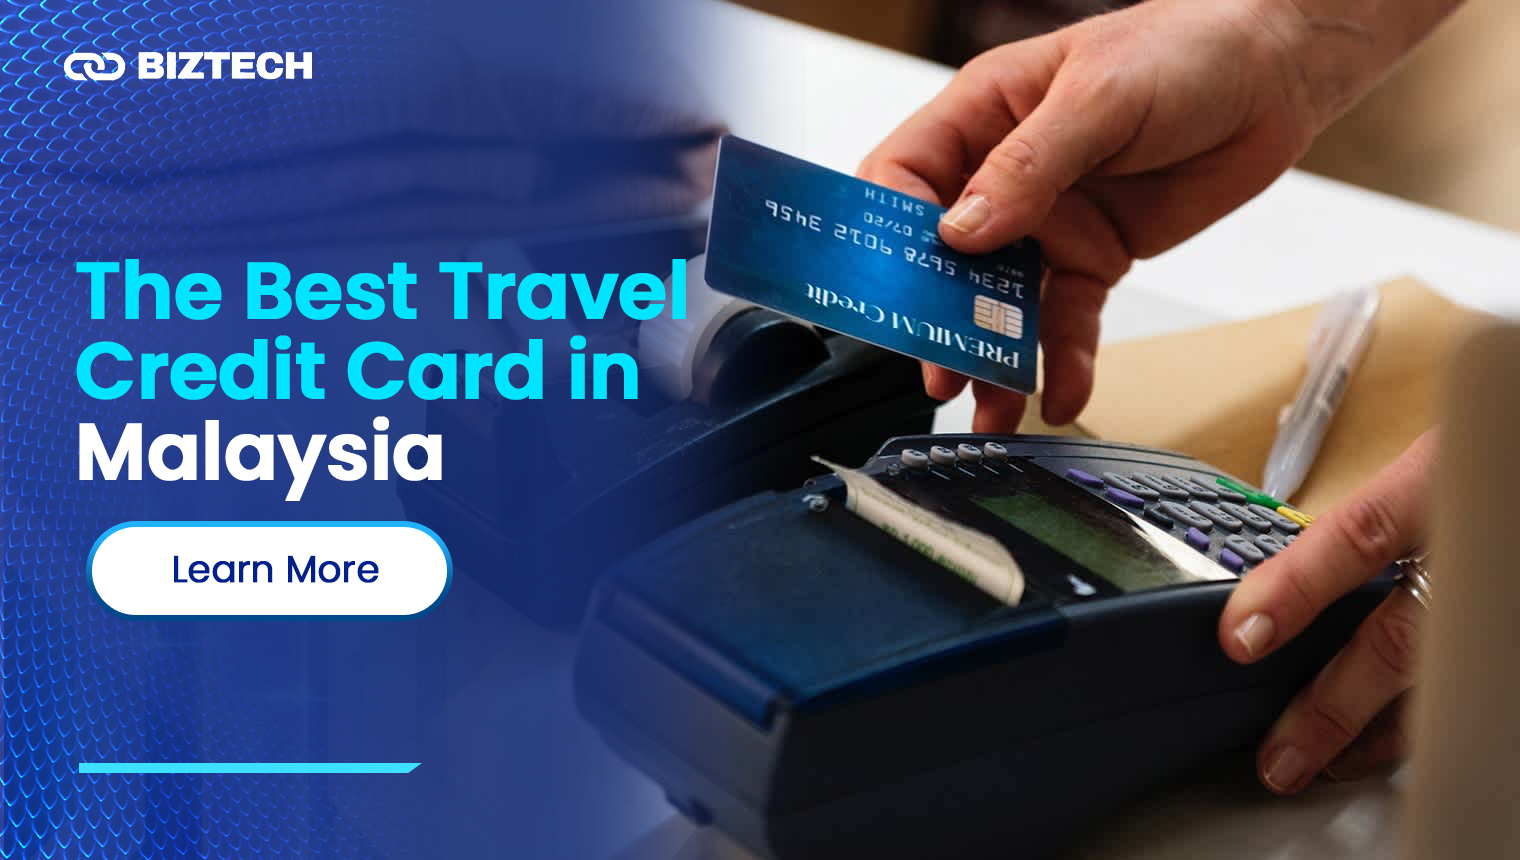 The Best Travel Credit Card In Malaysia